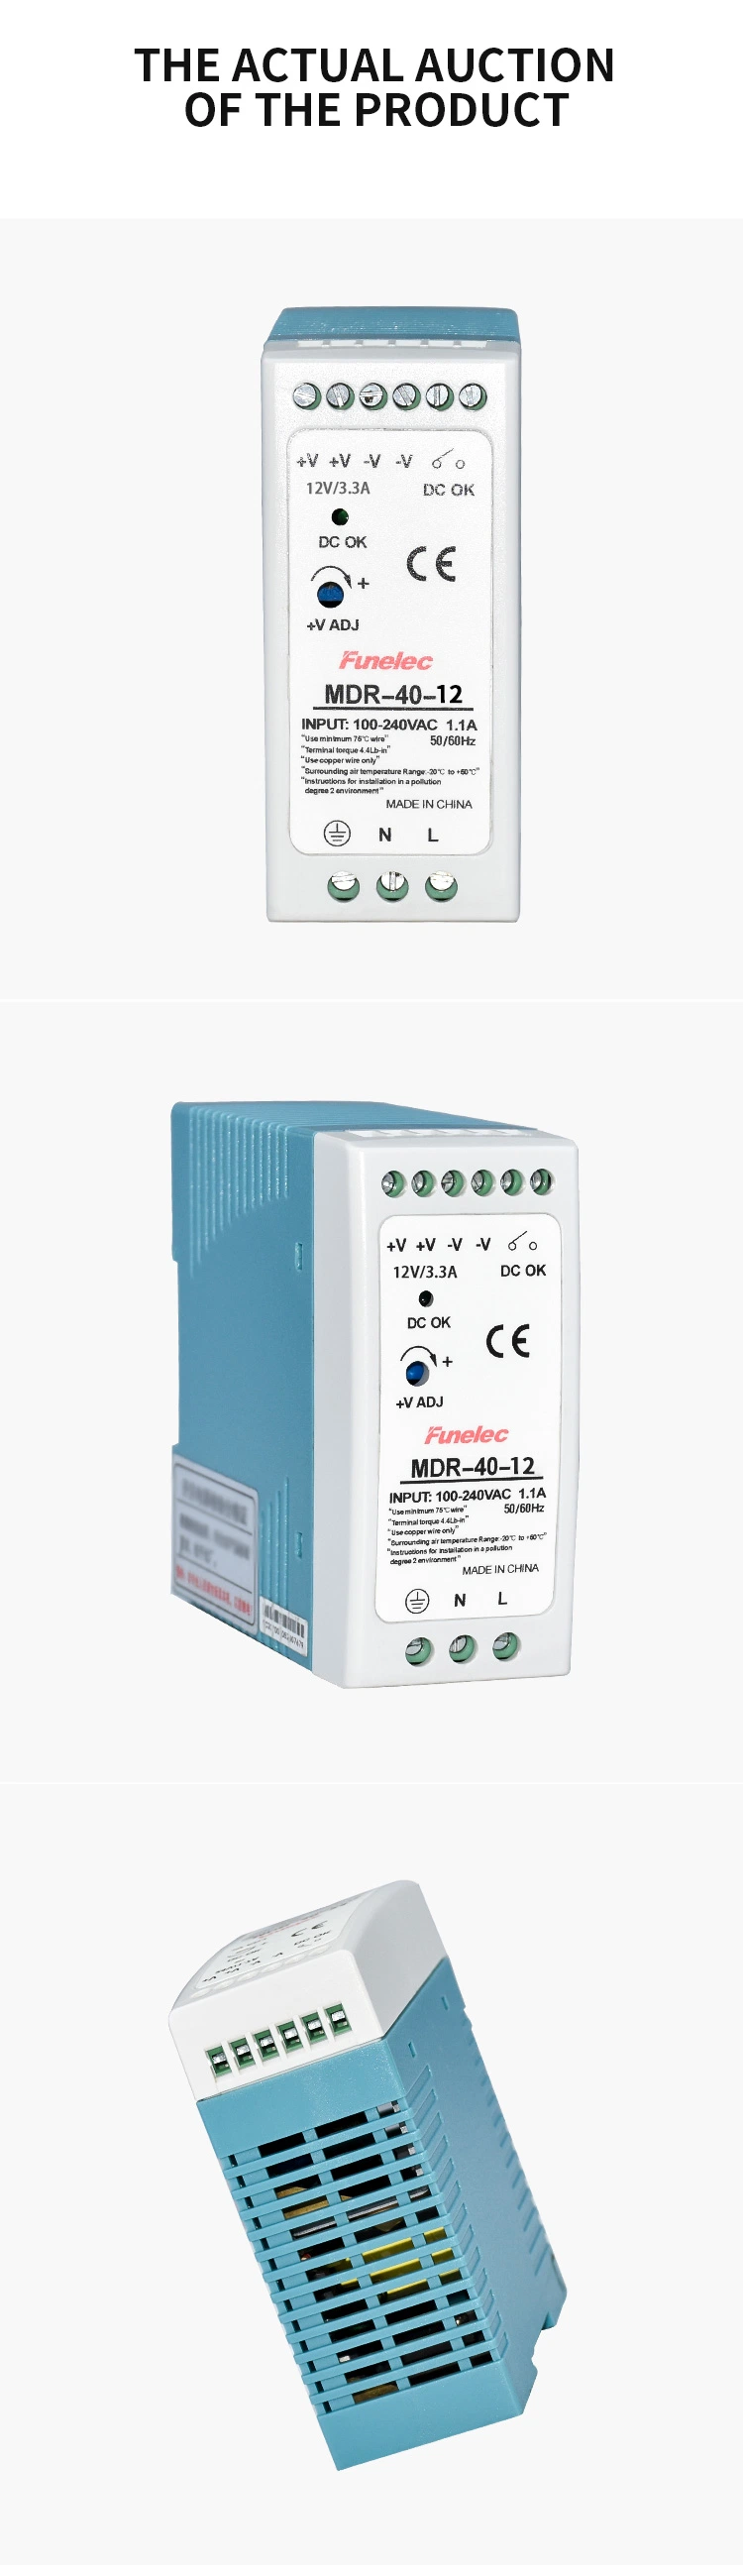 Mdr-40-12V 3.3A AC to DC Transformer 40W Is Installed on The Rail Switching Power Supply Card